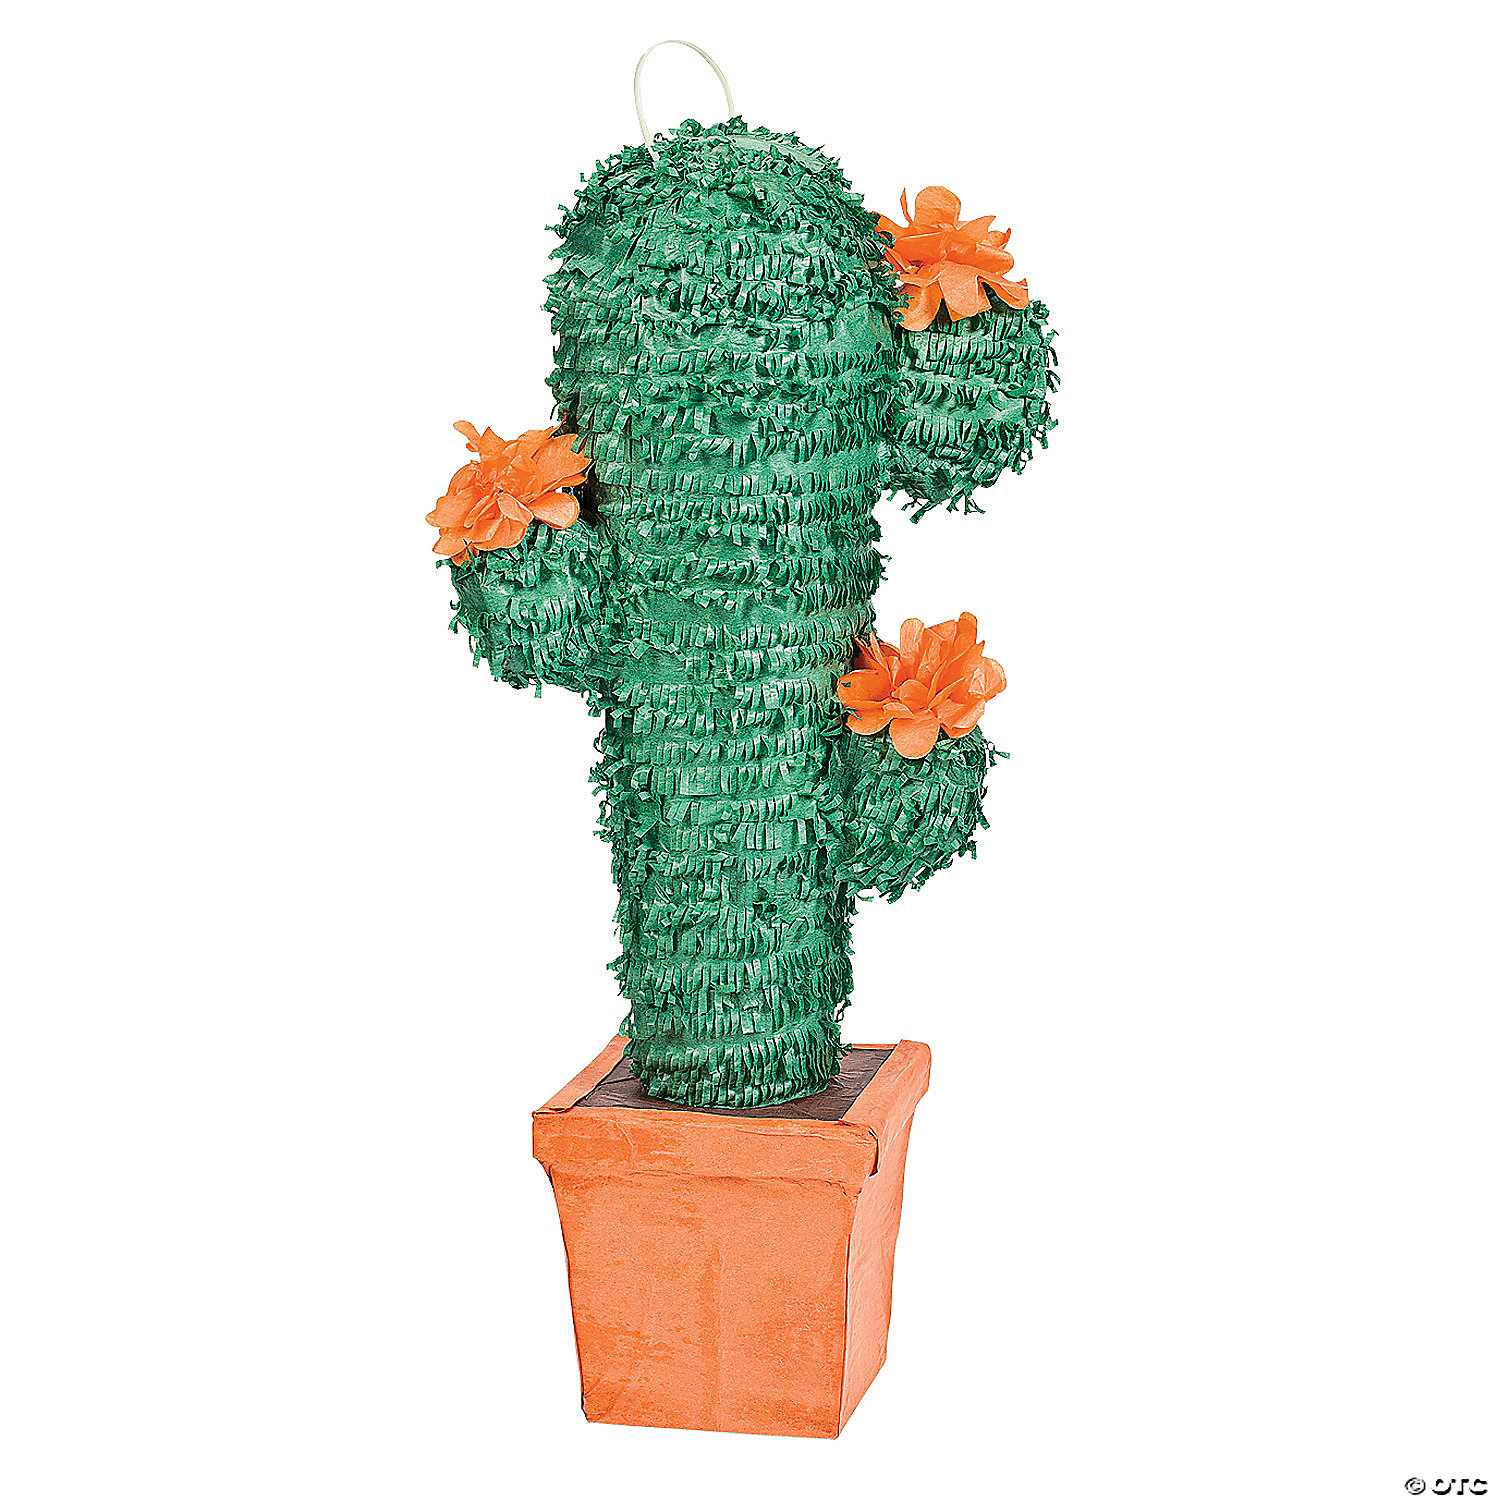 Cactus Pinata for all your Fiesta celebrations